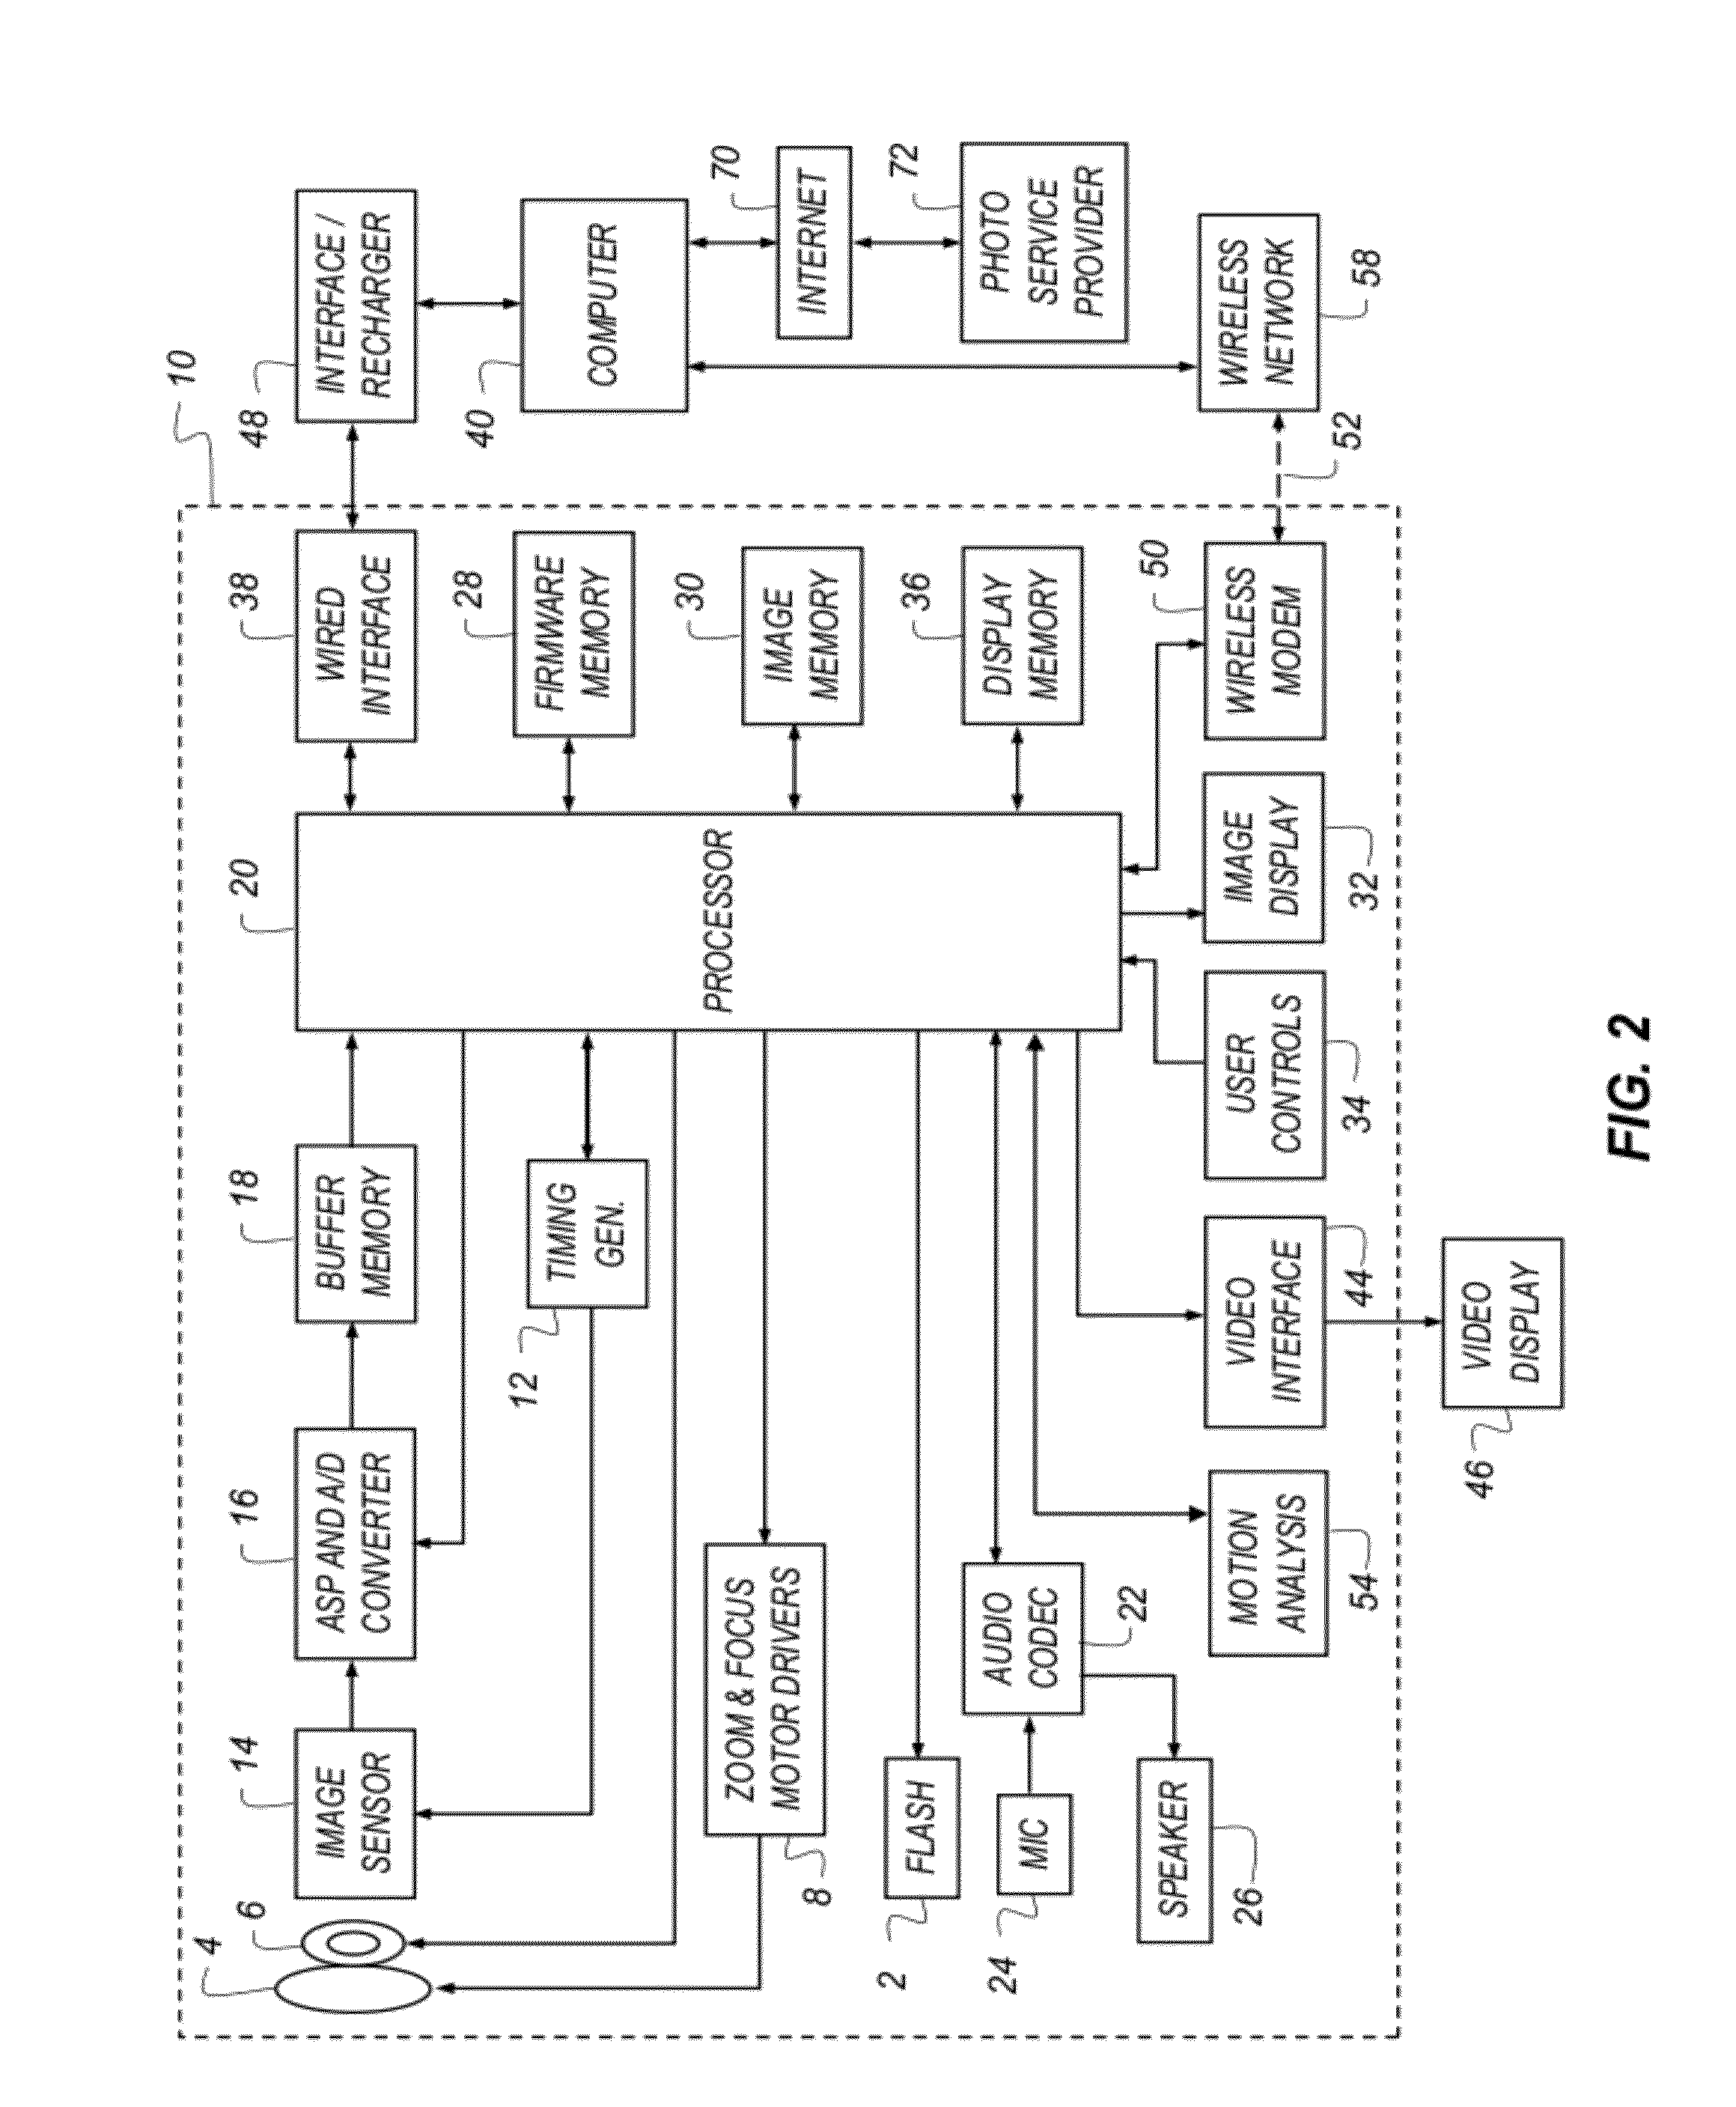 Digital camera for capturing an image sequence